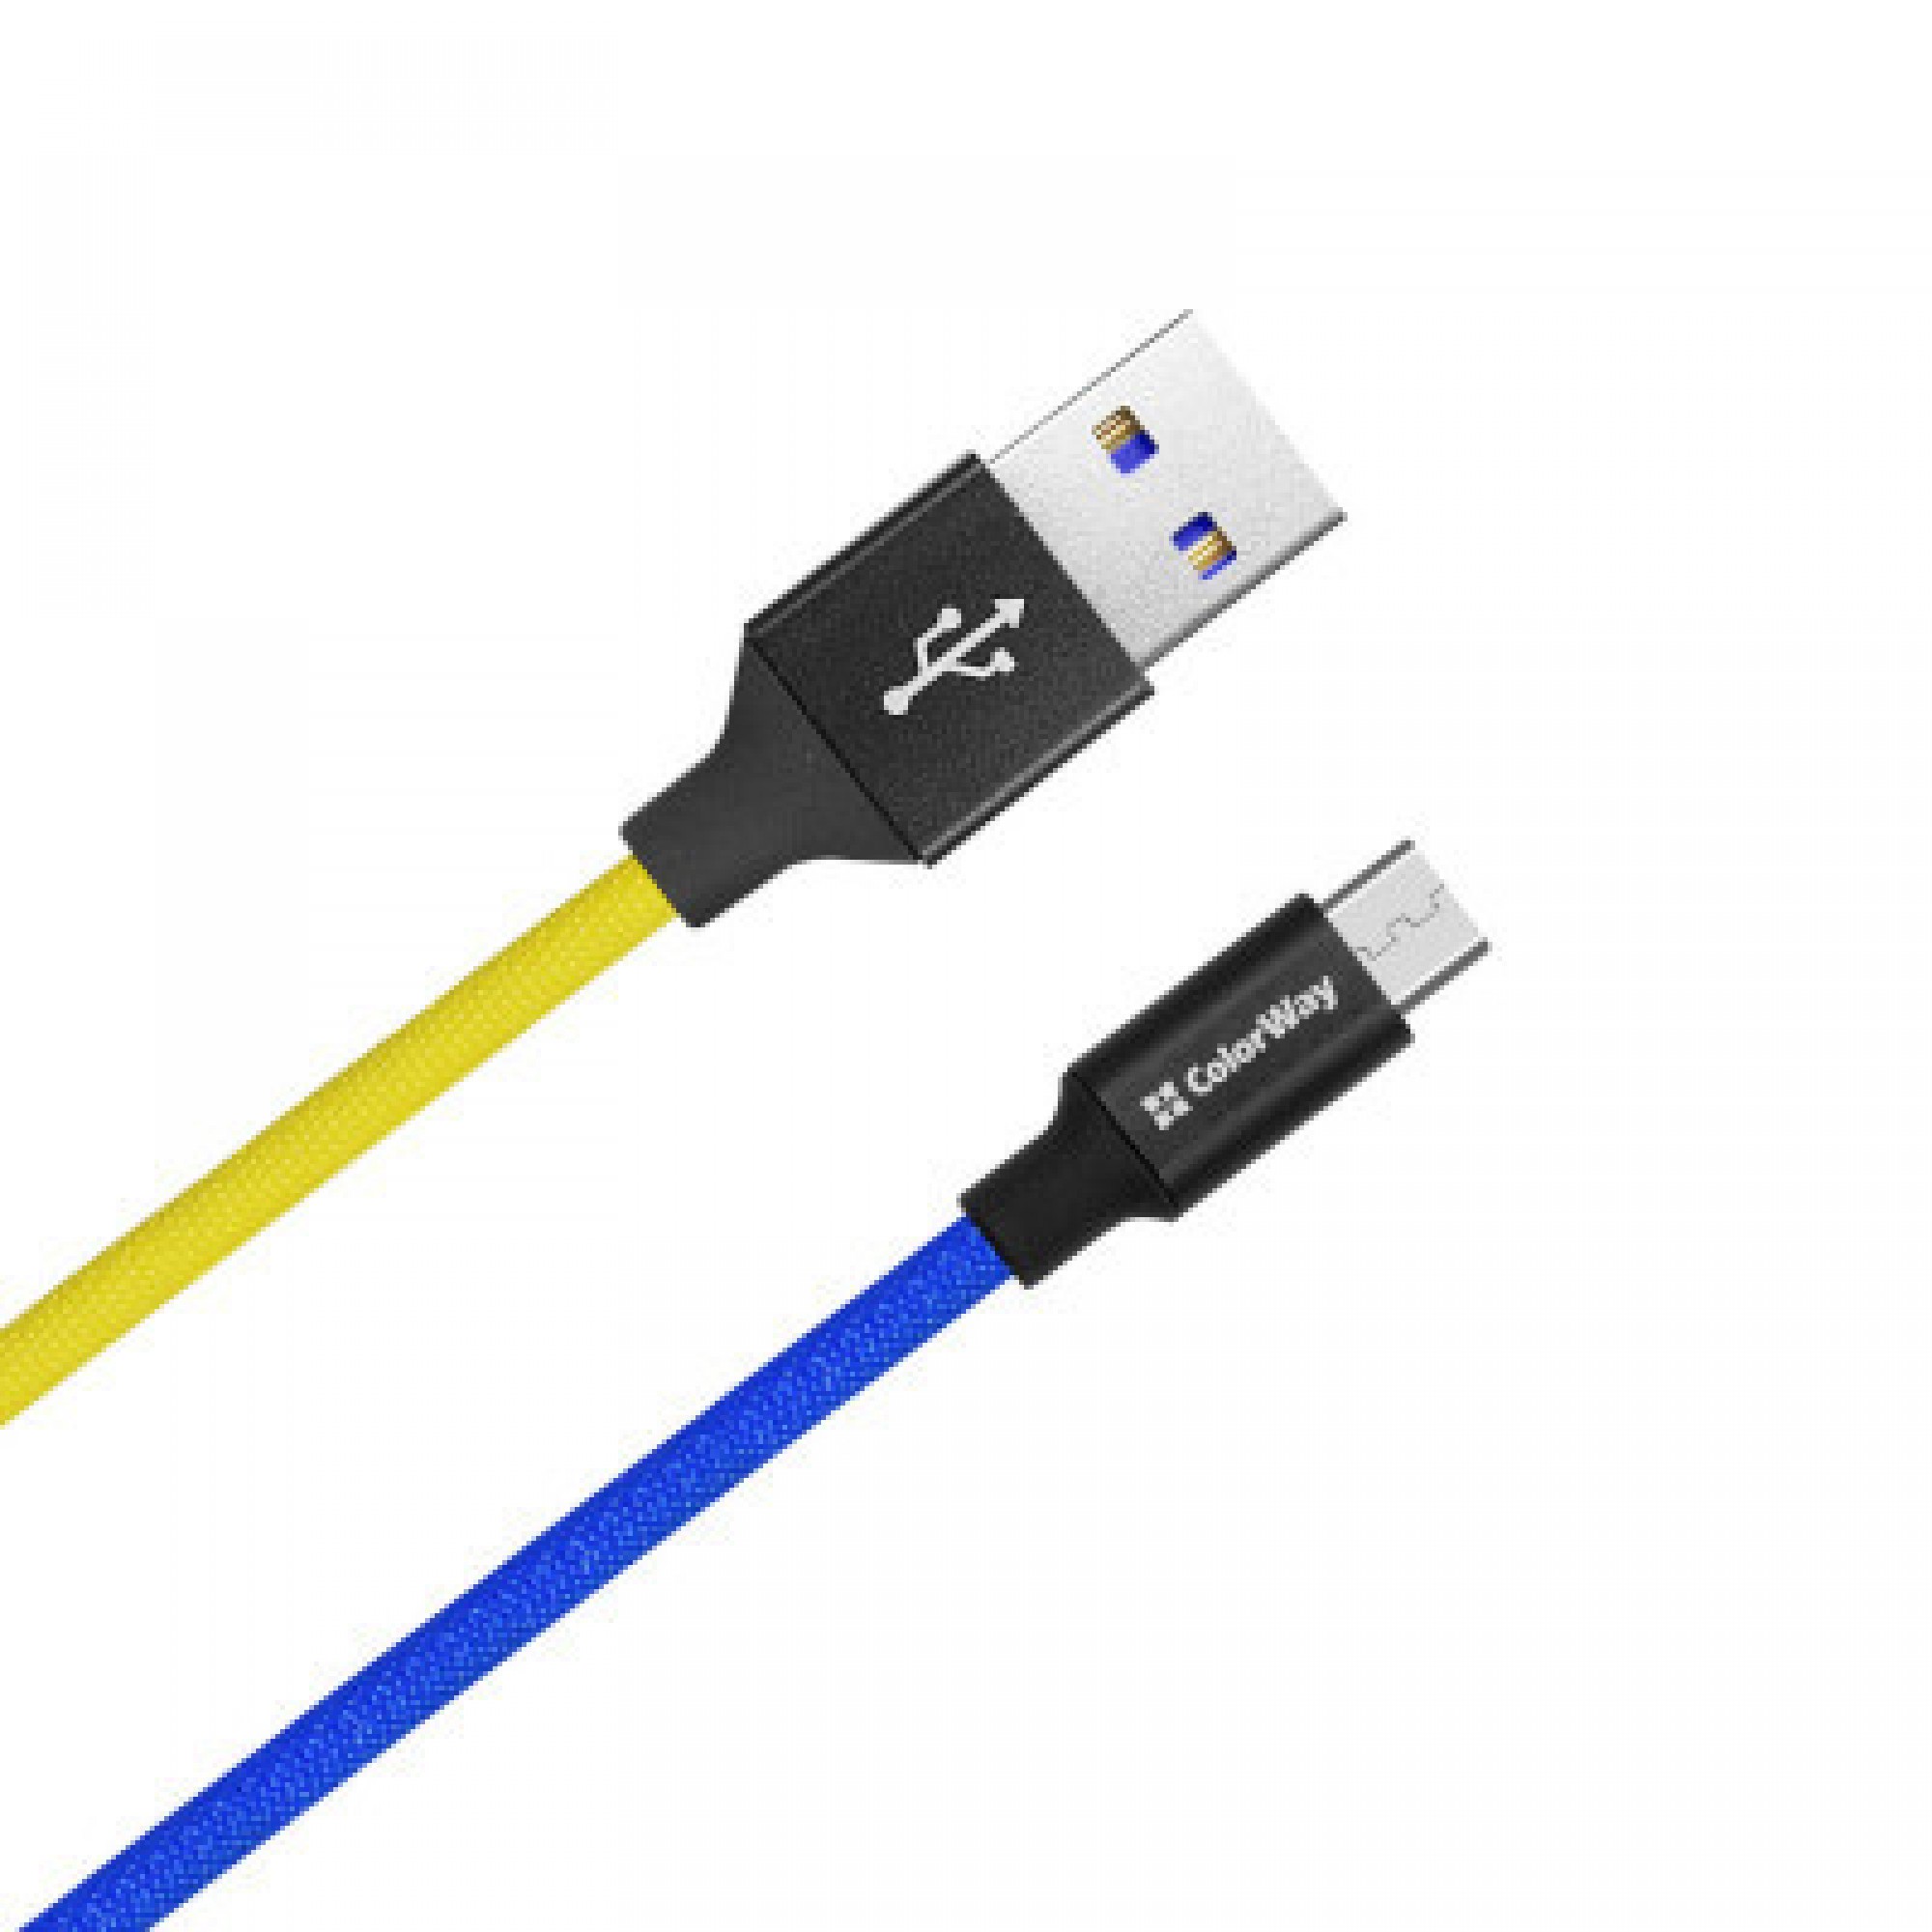 Дата кабель USB 2.0 AM to Micro 5P 1.0m National ColorWay (CW-CBUM052-BLY)